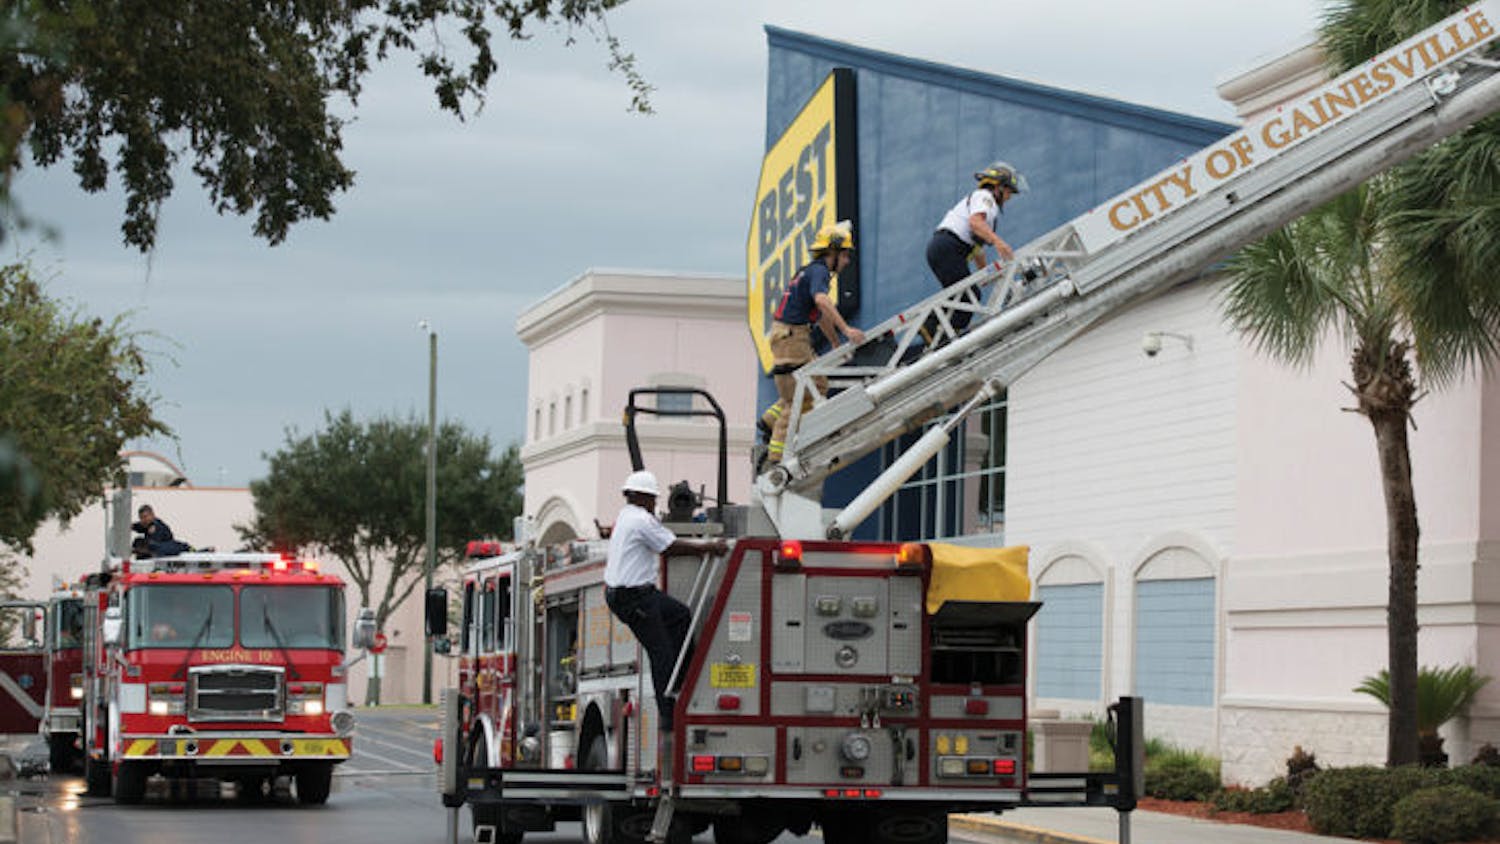 Gainesville Fire Rescue works to put out a fire on about 60 of the solar panels of a Butler Plaza Best Buy storage unit. The cause of the fire is under investigation.